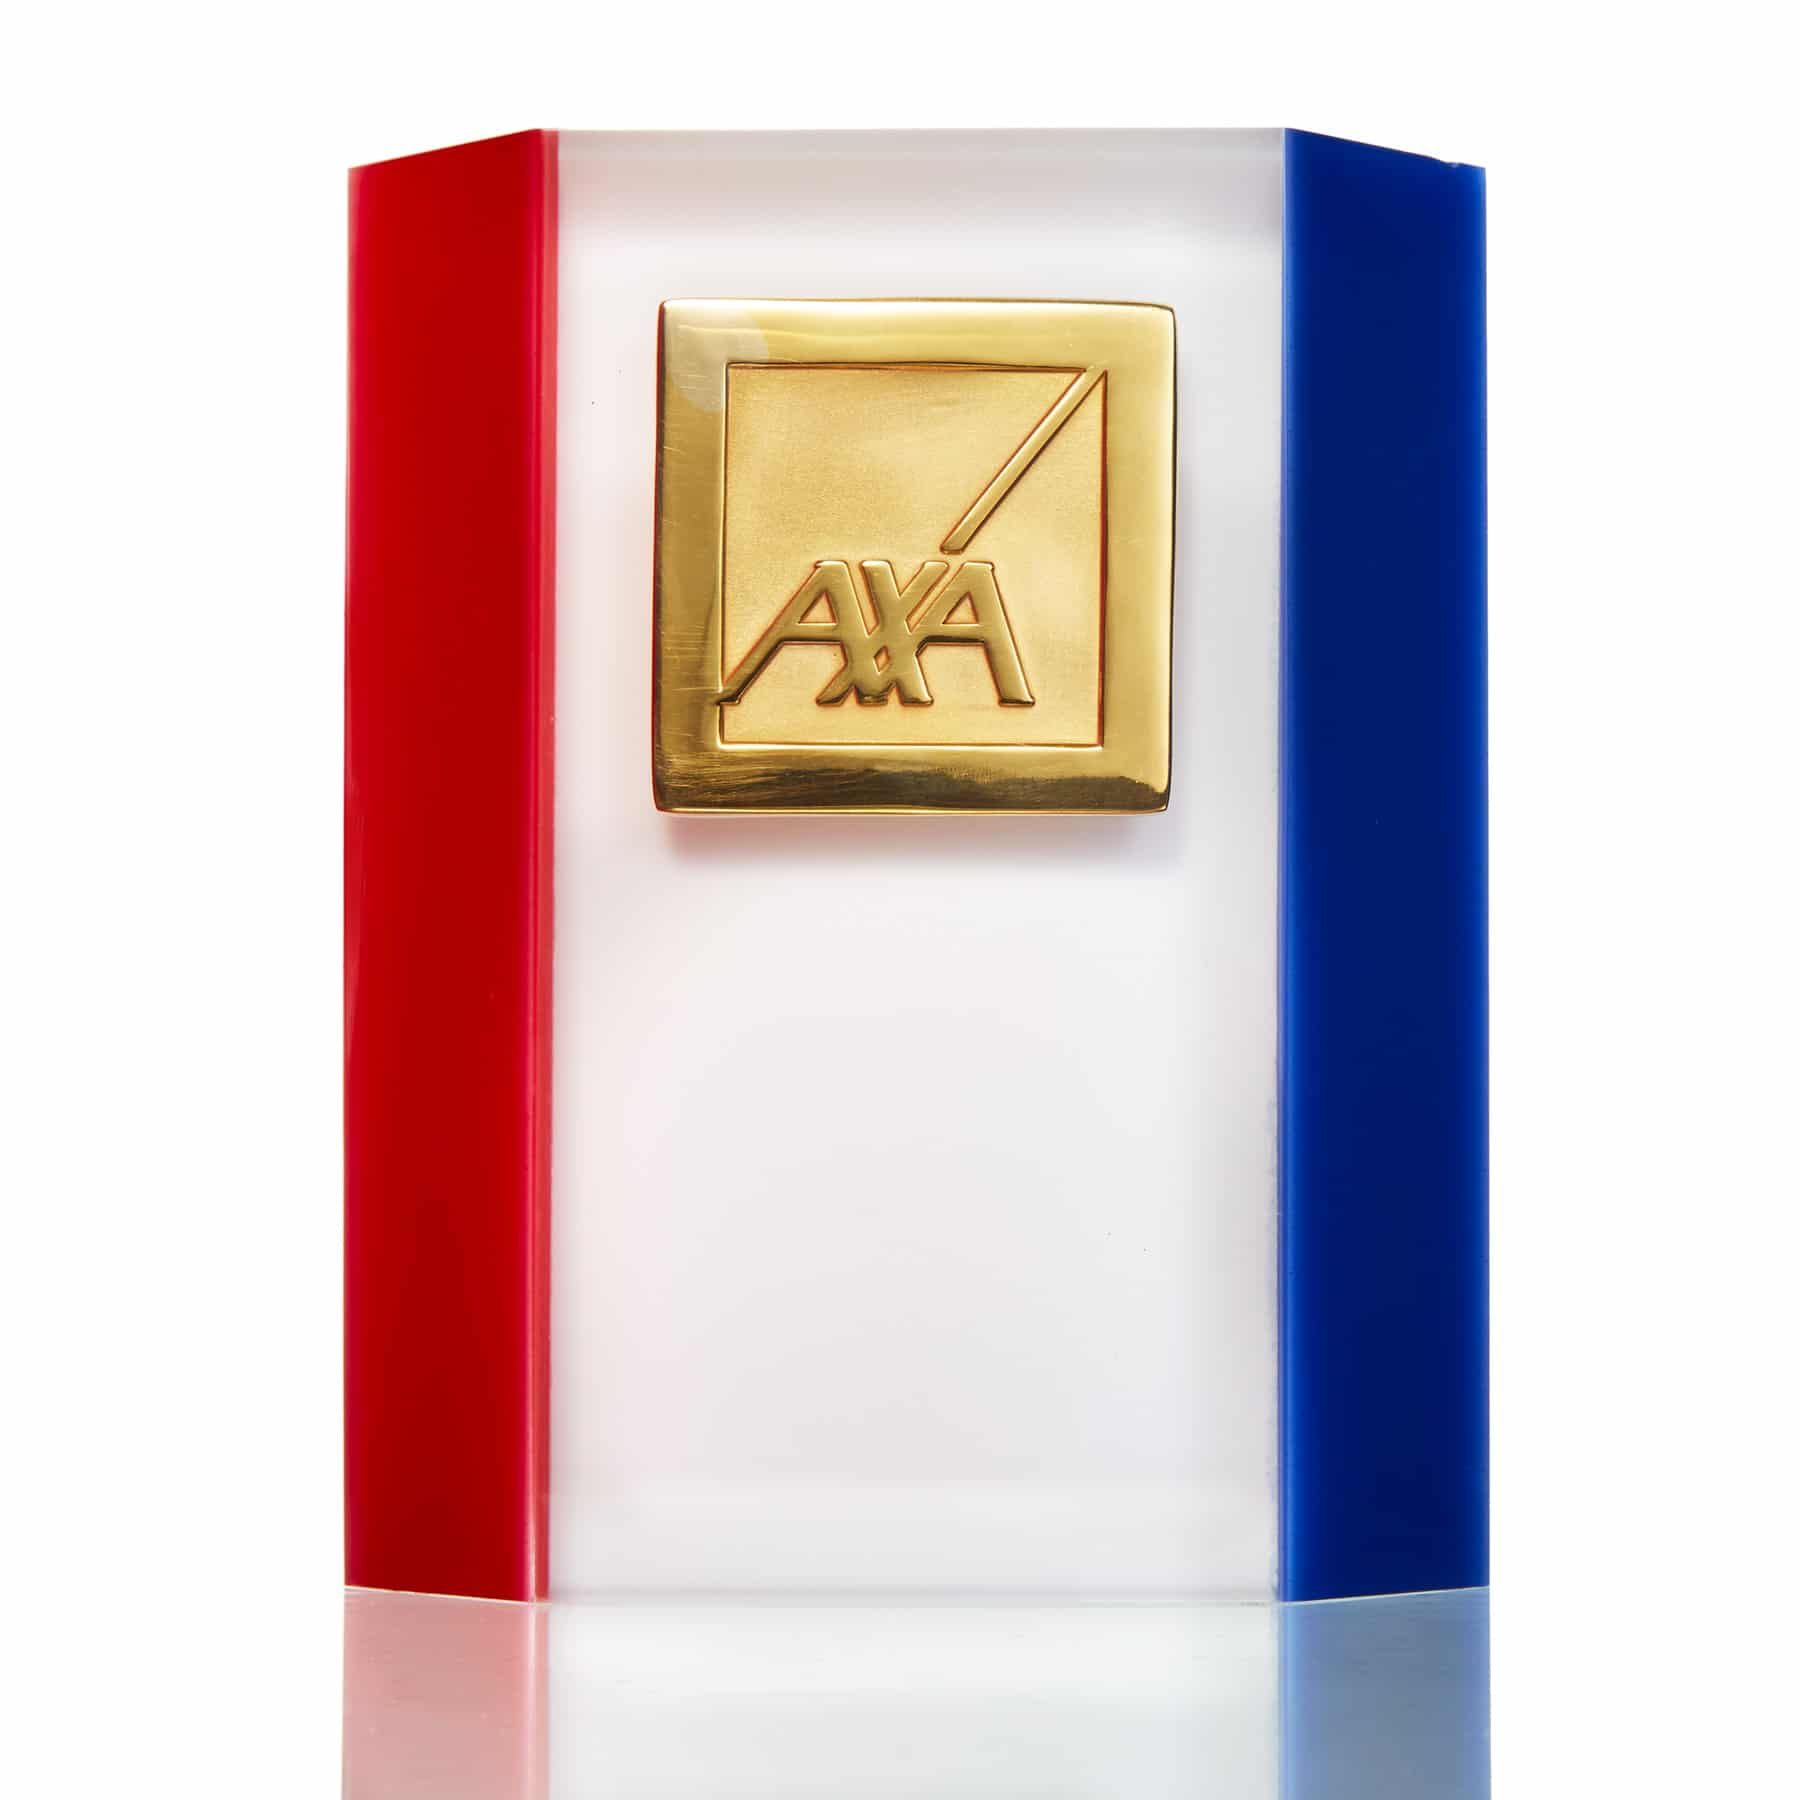 axa recognition embedments